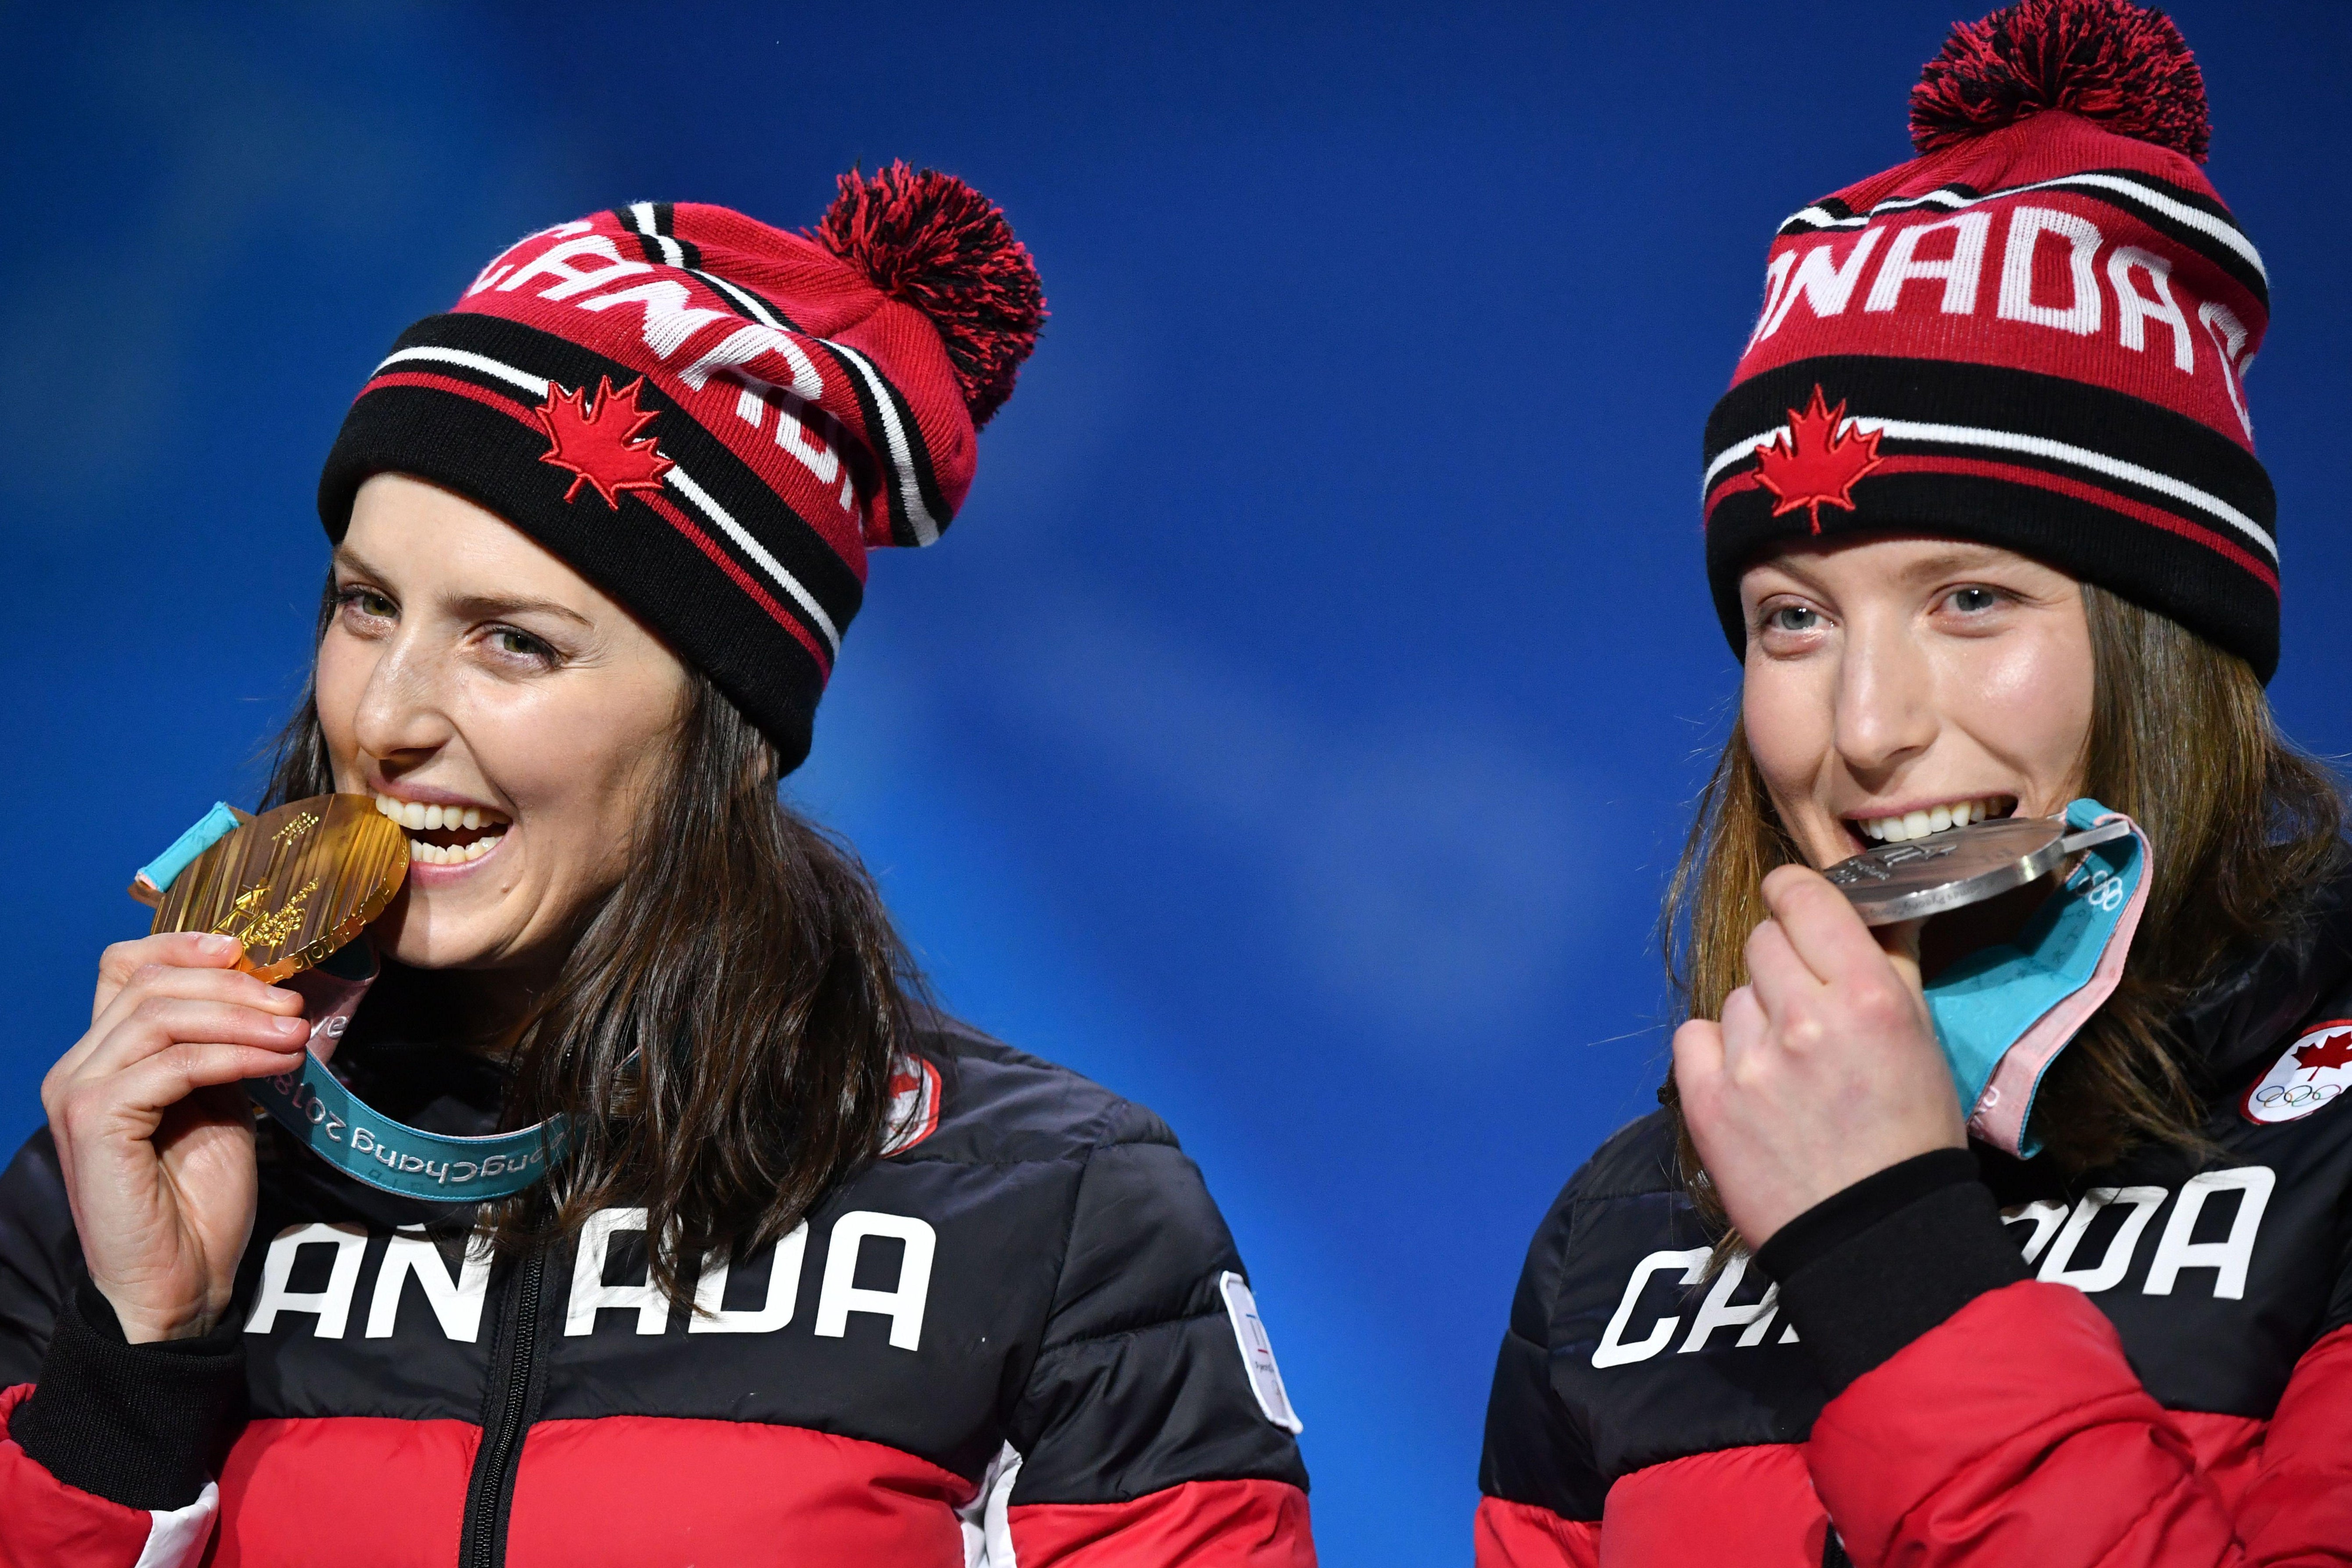 Canada's silver medallist Brittany Phelan and Canada's gold medallist Kelsey Serwa (L) bite their medals on the podium during the medal ceremony for the freestyle skiing Women's Ski Cross at the Pyeongchang Medals Plaza during the Pyeongchang 2018 Winter Olympic Games in Pyeongchang on February 23, 2018. / AFP PHOTO / Dimitar DILKOFF        (Photo credit should read DIMITAR DILKOFF/AFP/Getty Images)